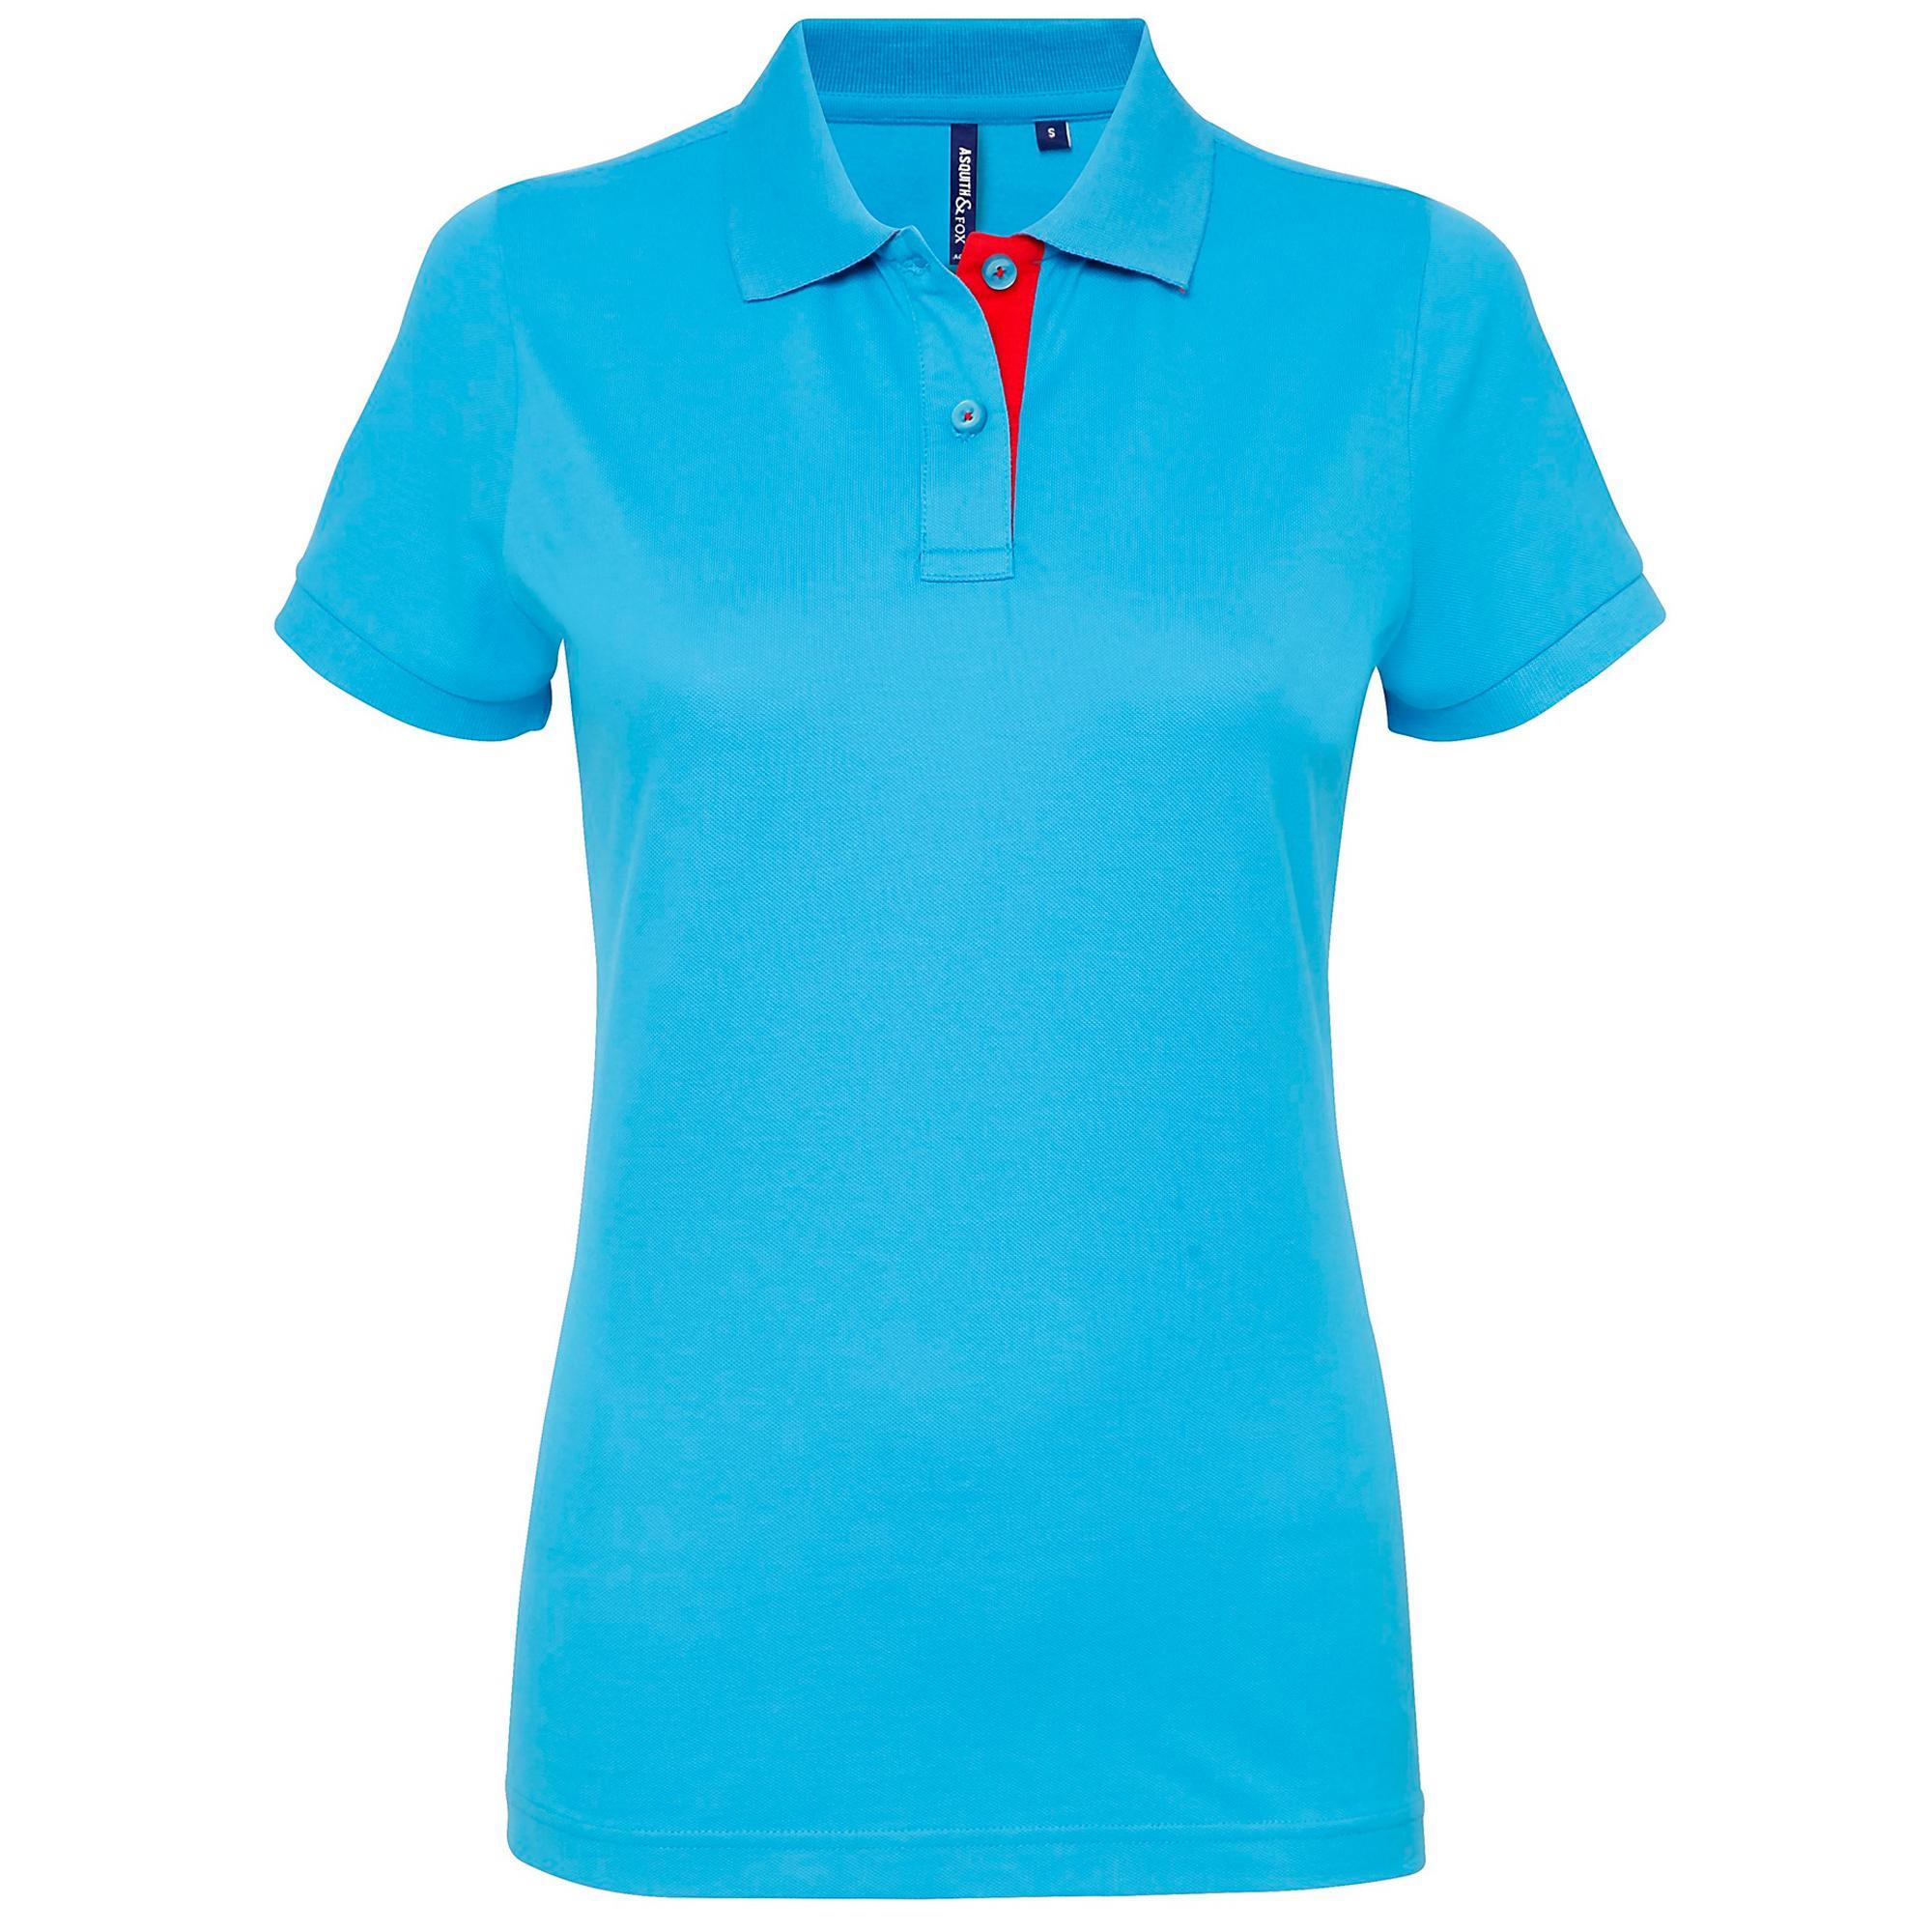 Asquith & Fox Womens/Ladies Short Sleeve Contrast Polo Shirt (Turquoise/ Red) (2XL)